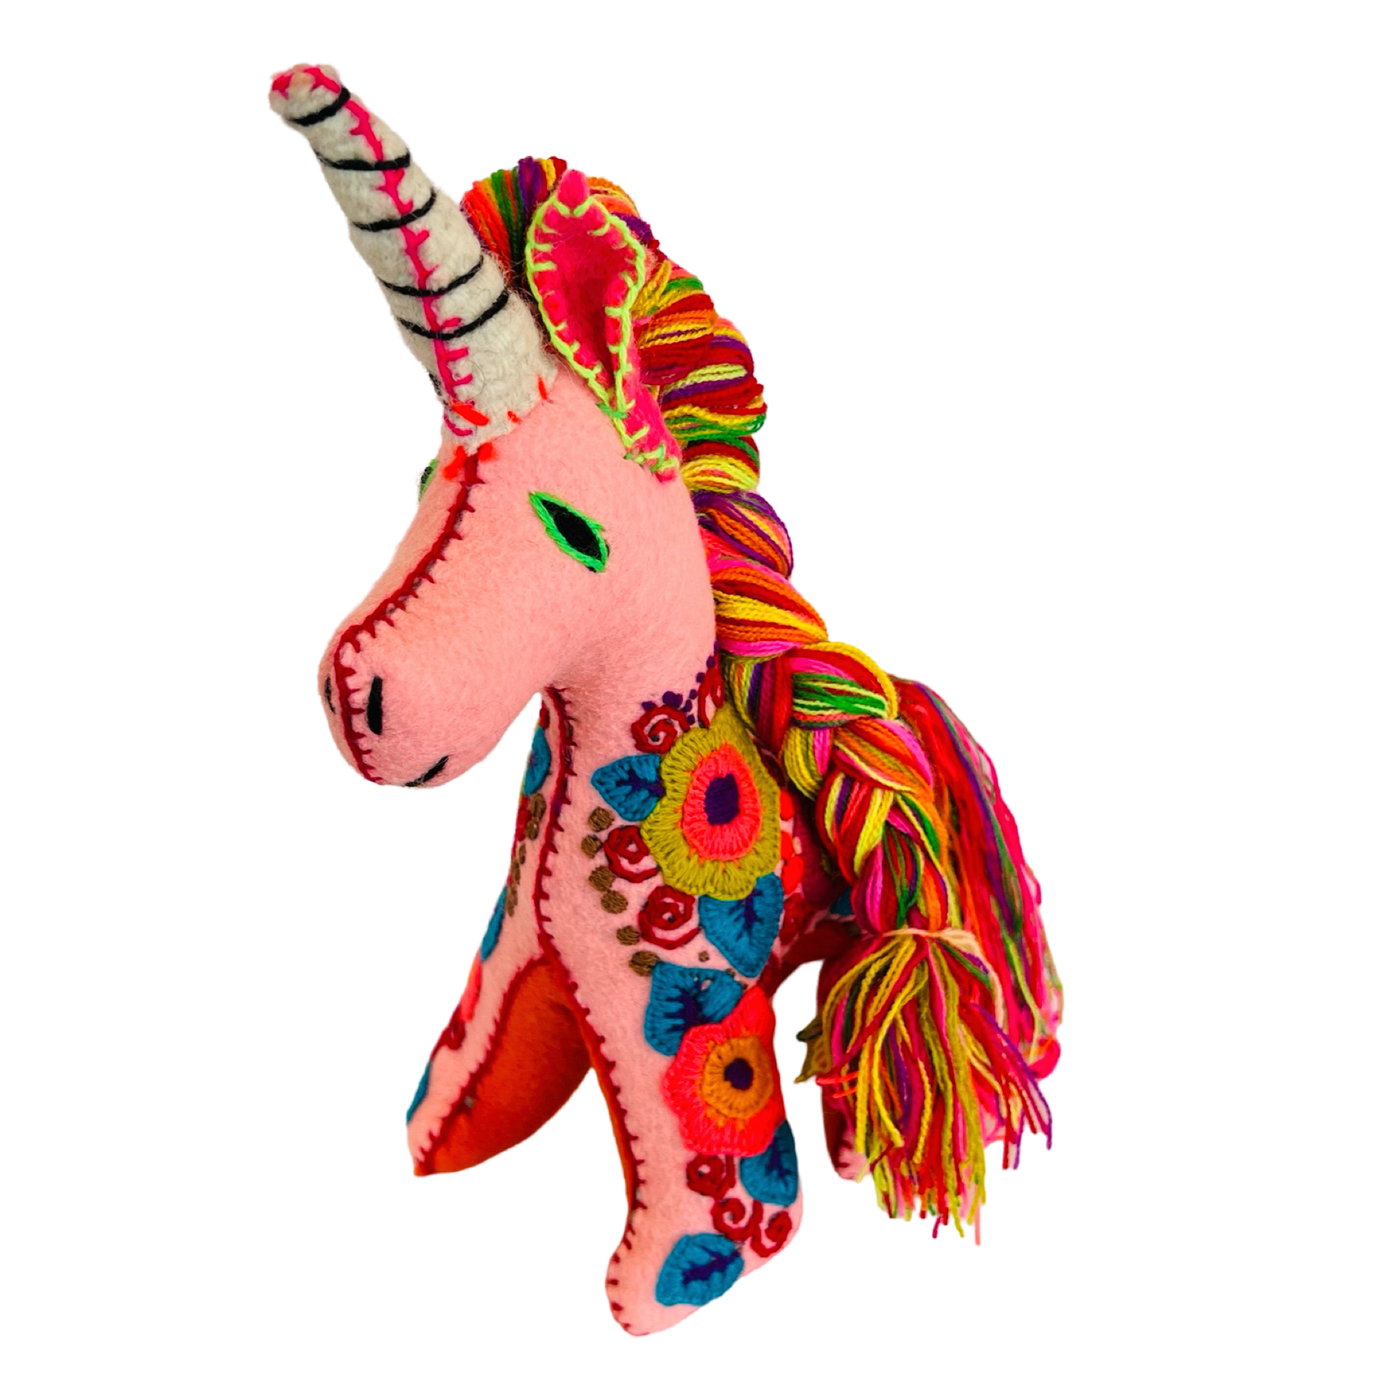 side view of a pink felt unicorn with a floral embroidered design